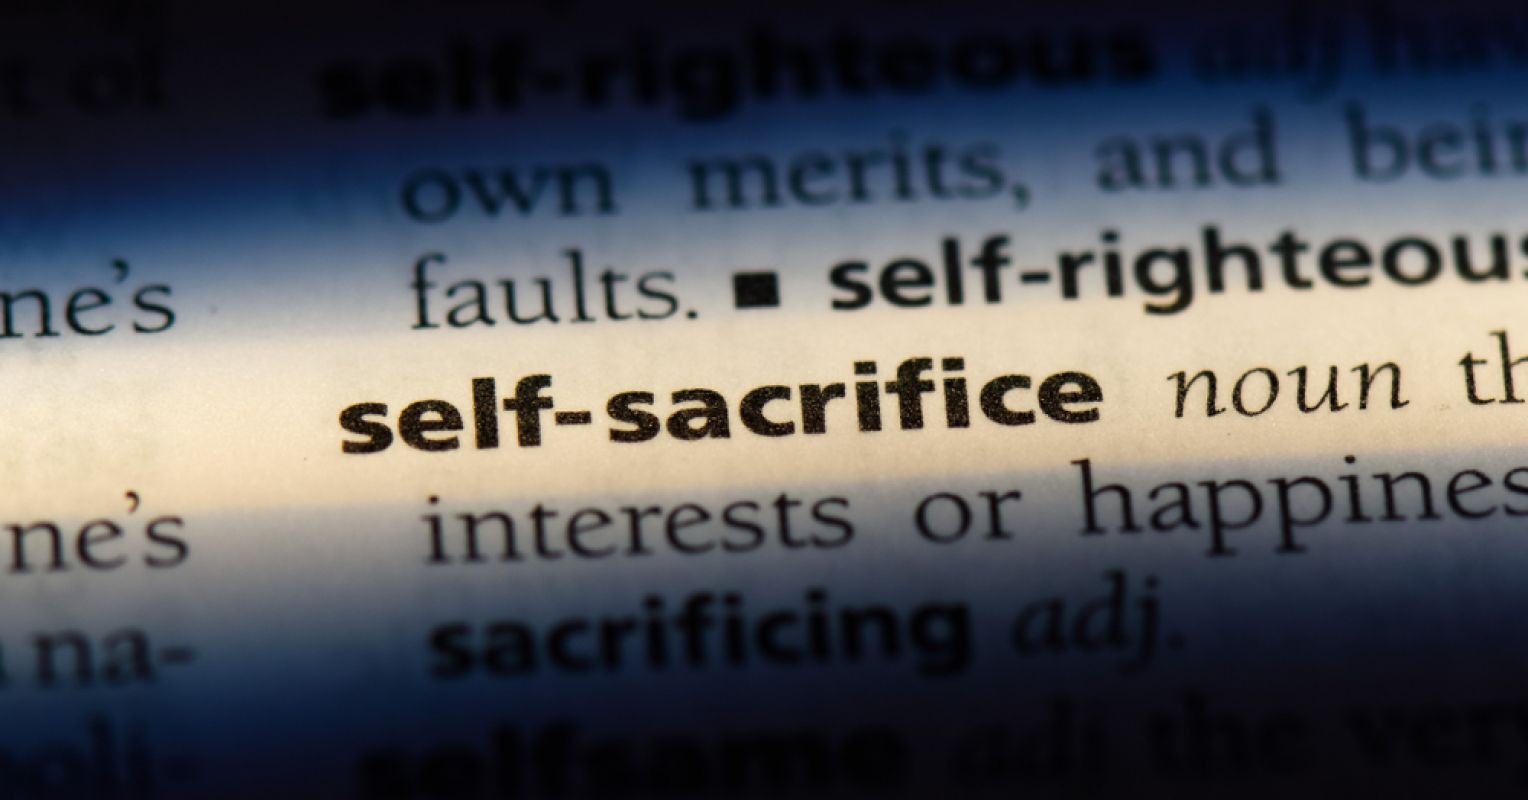 Unexpected Sacrifices - When sacrifice has a new meaning